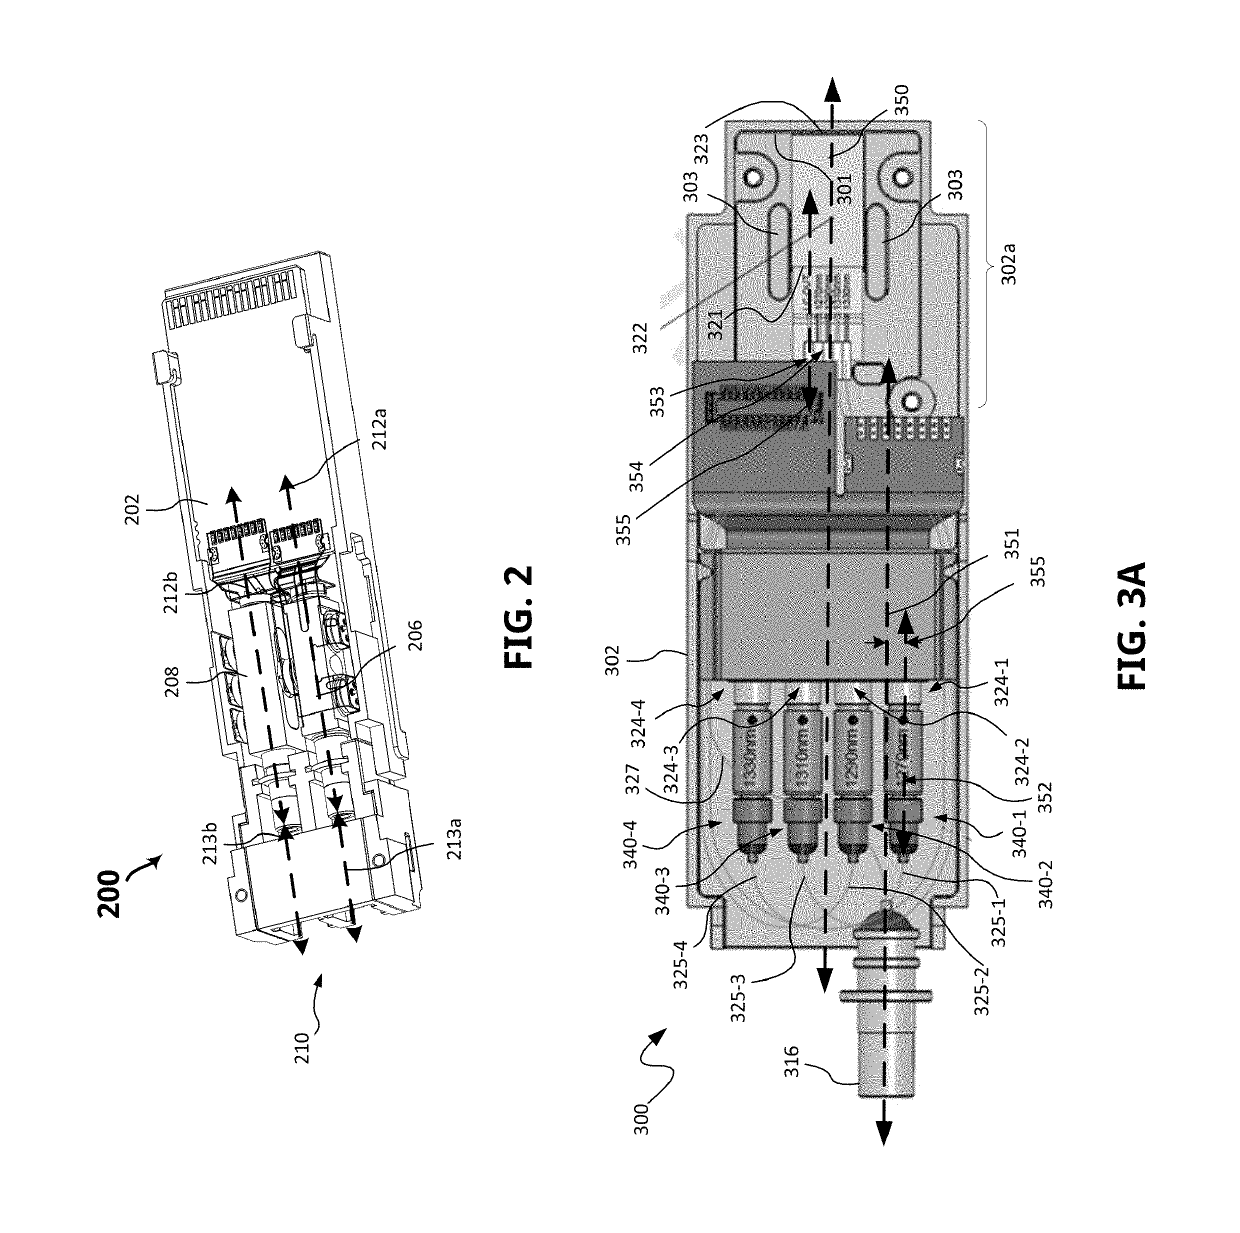 Techniques for indirect optical coupling between an optical input/output port of a subassembly housing and an arrayed waveguide grating (AWG) device disposed within the same